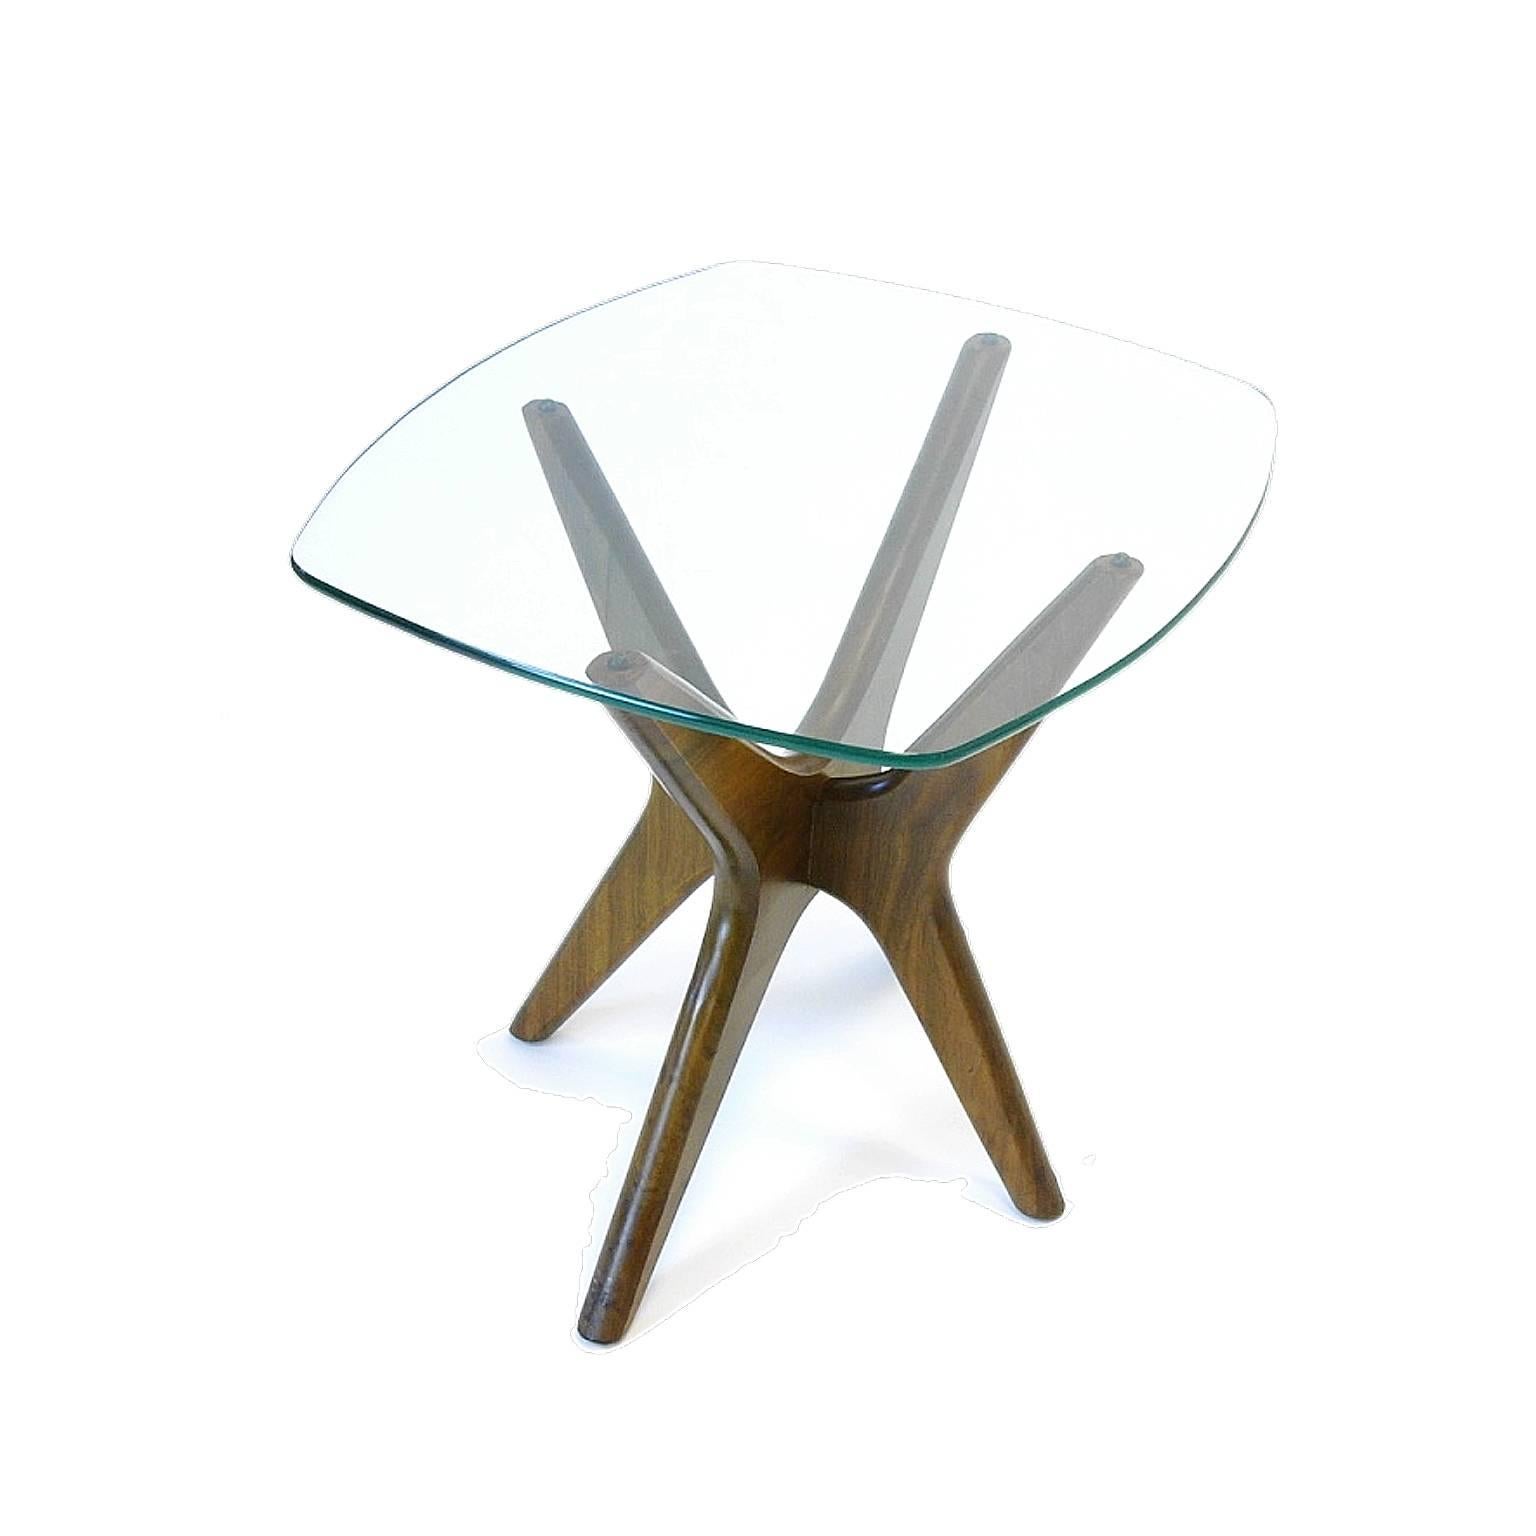 Lovely end table designed by Adrian Pearsall for Craft Associates.